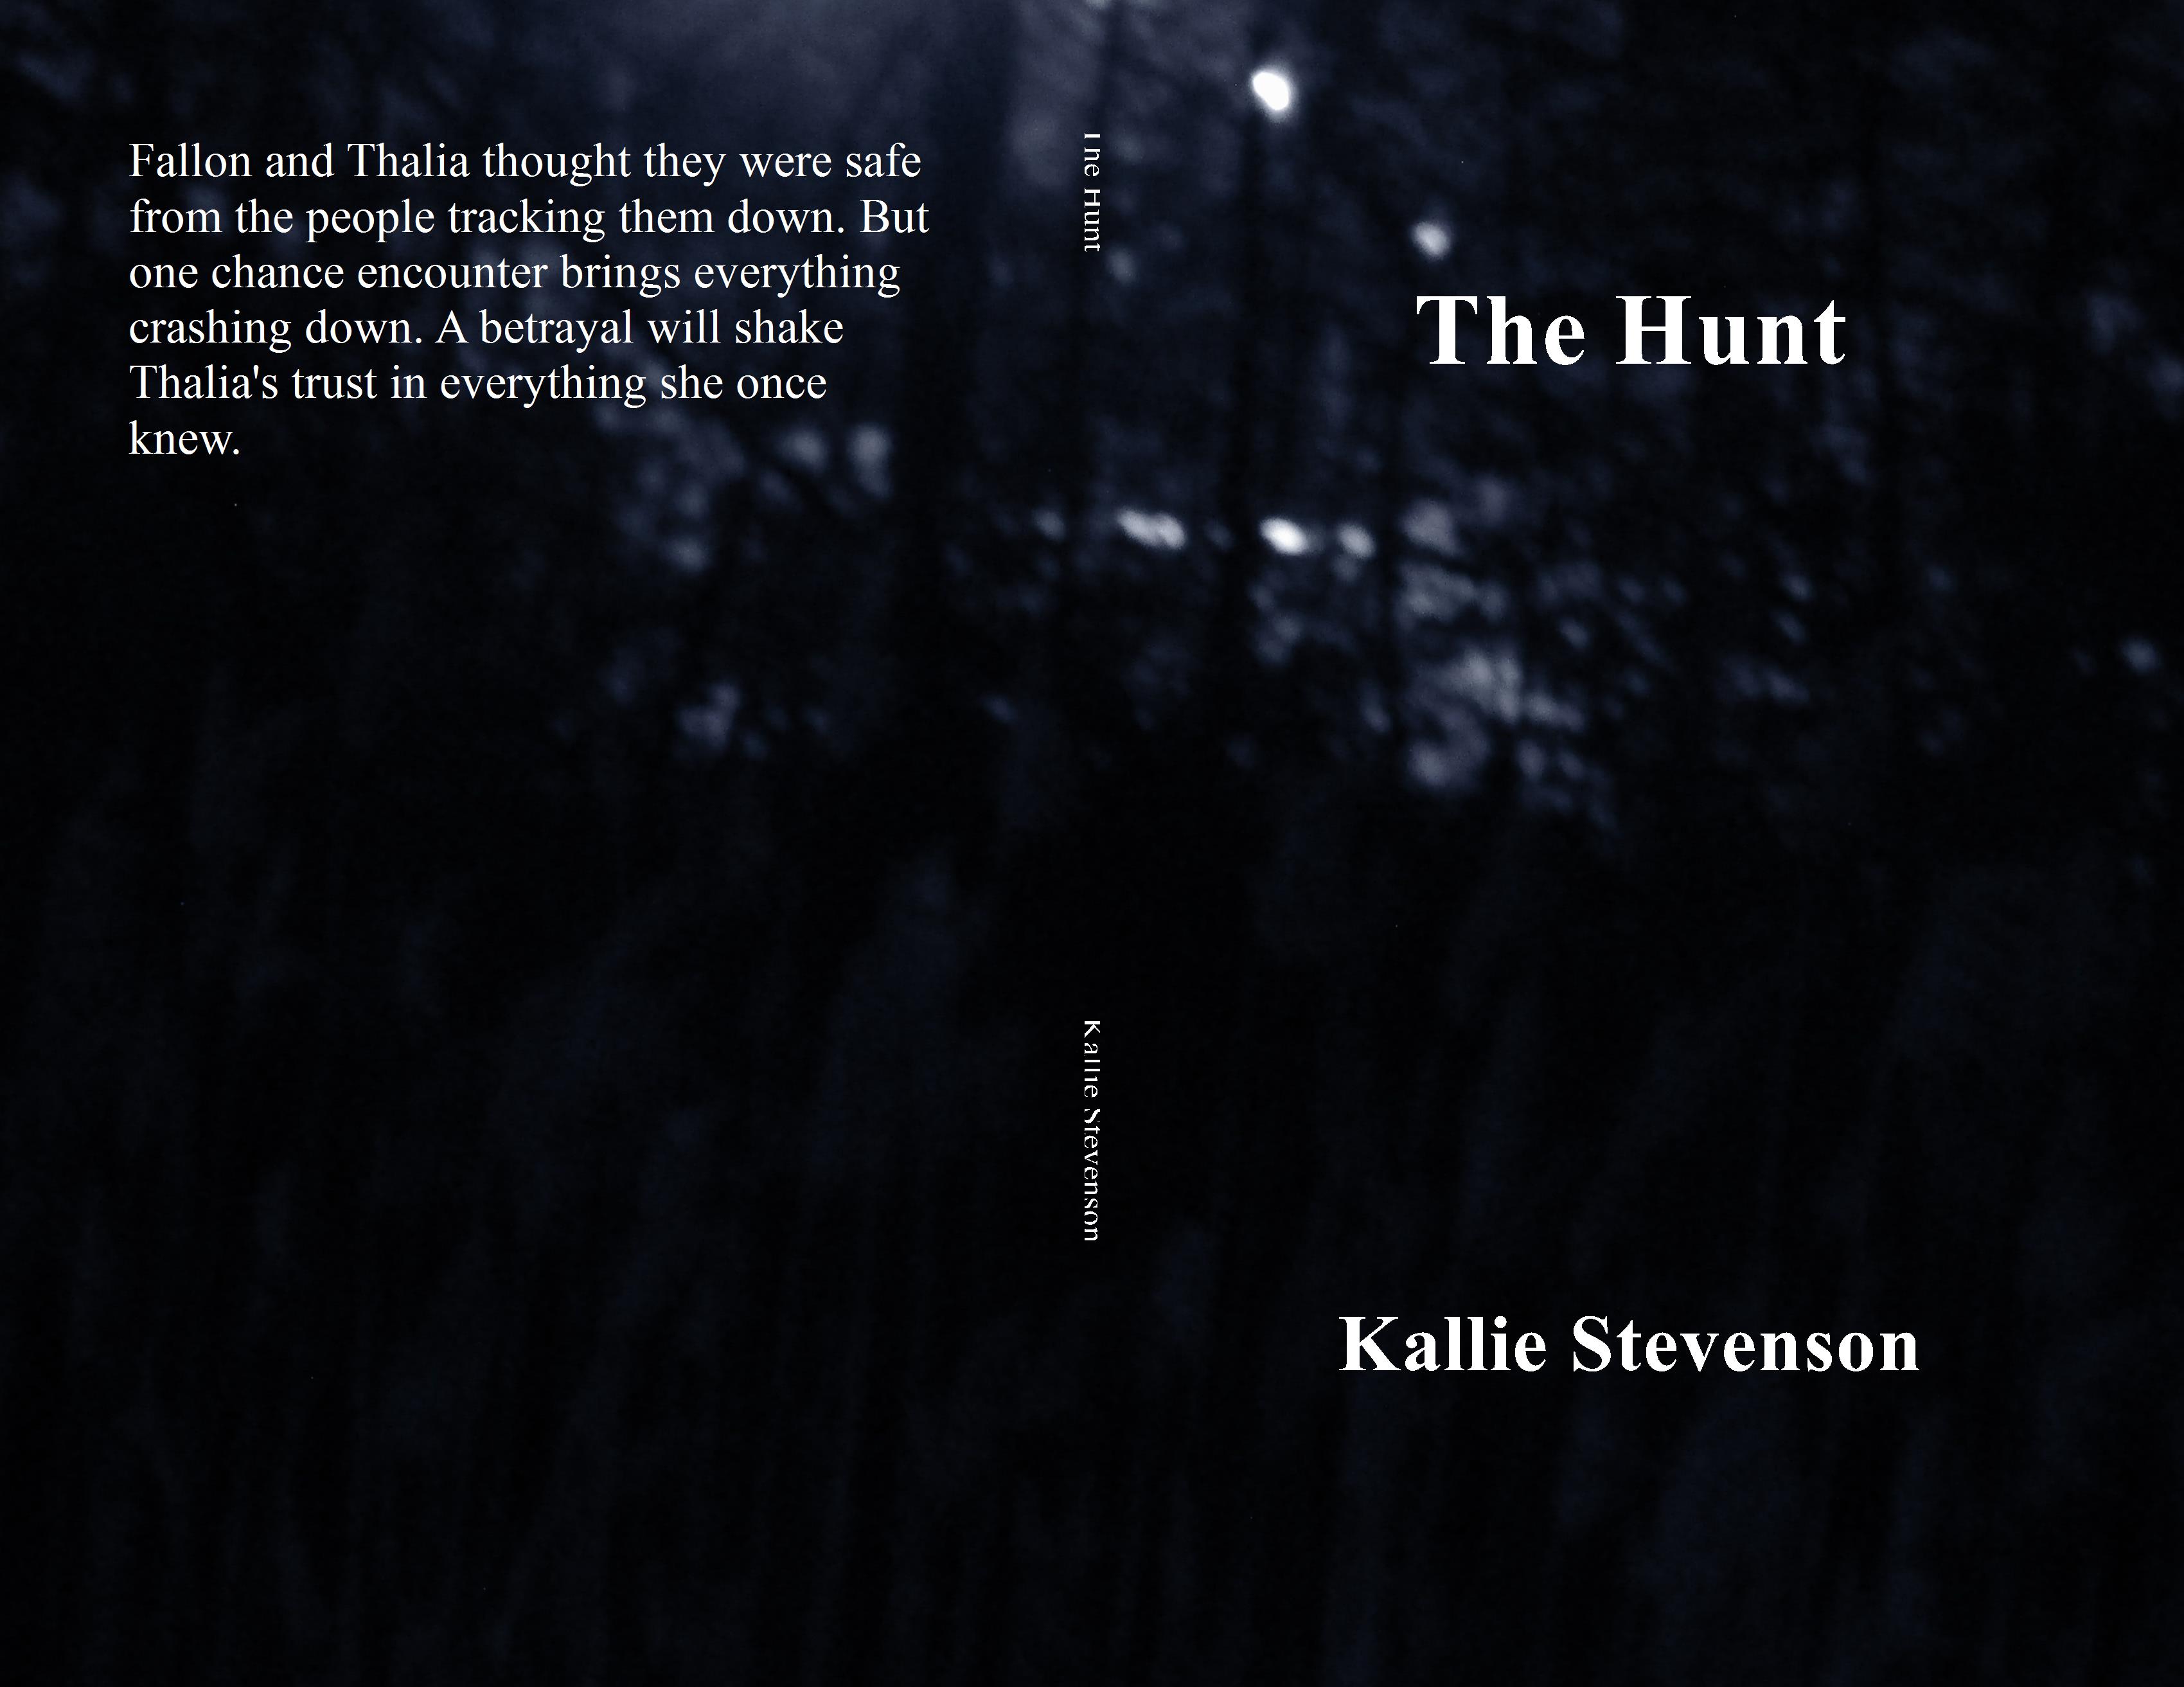 The Hunt cover image